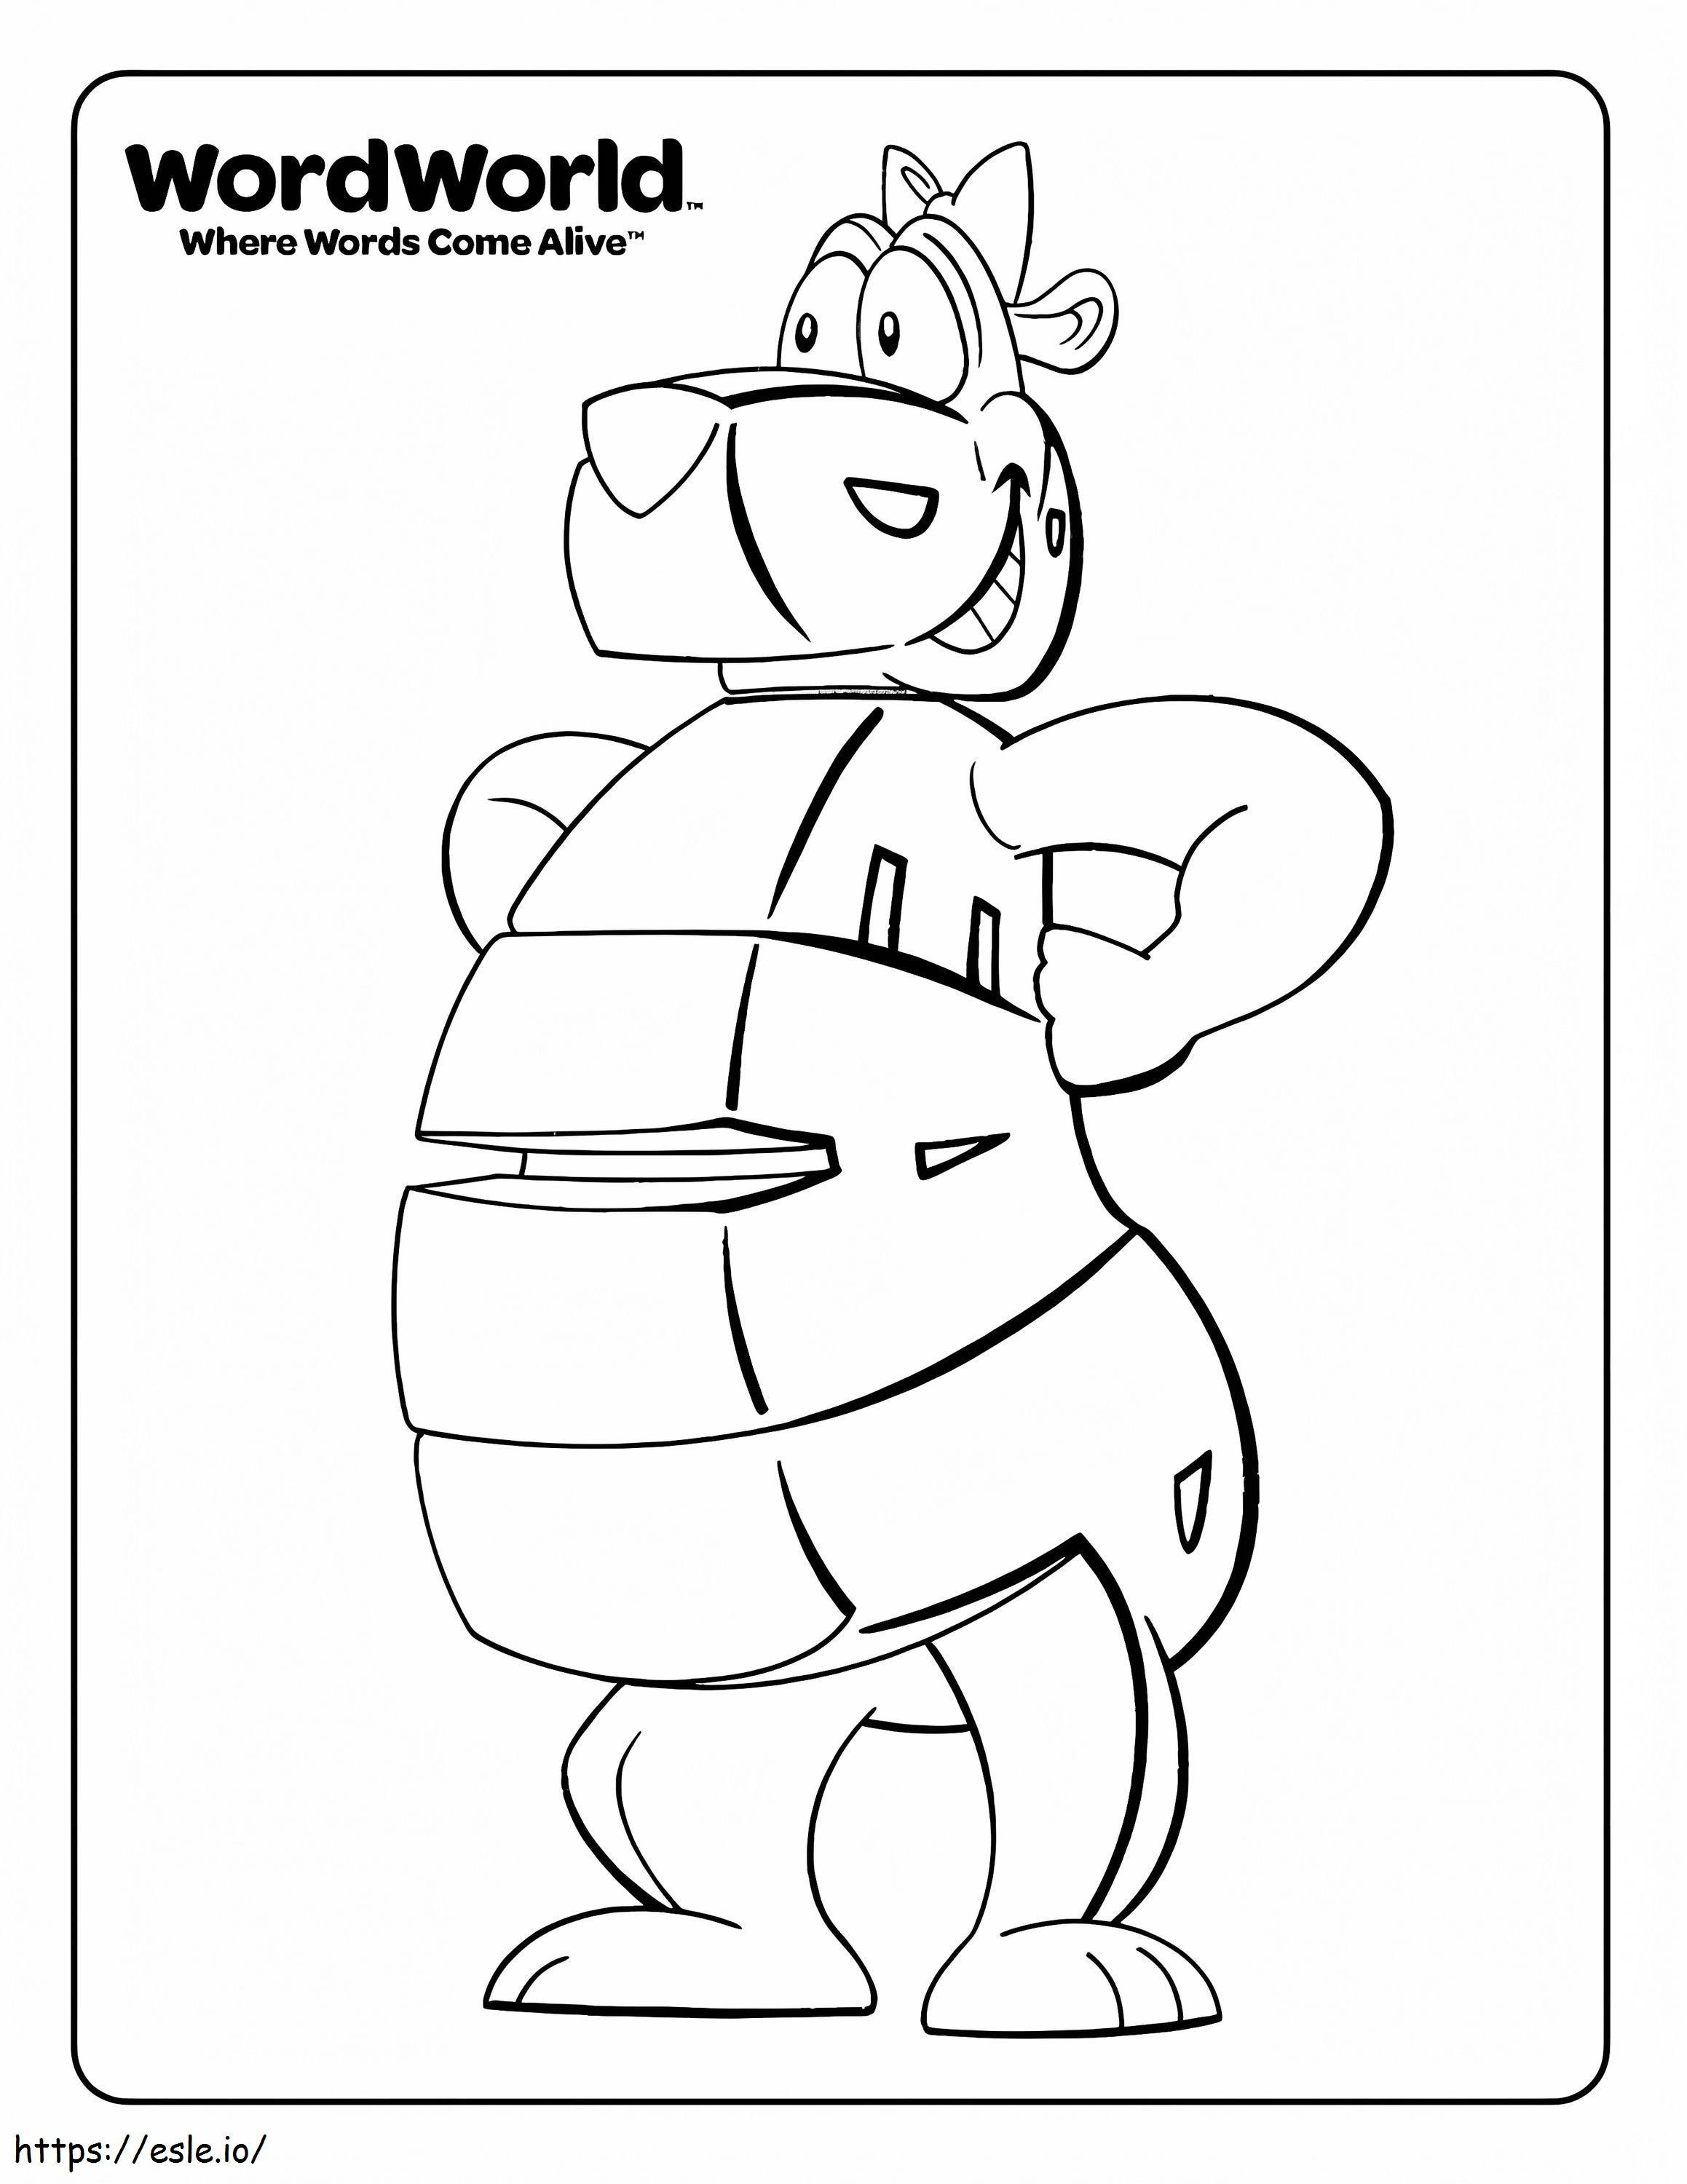 Bear WordWorld Coloring Page coloring page